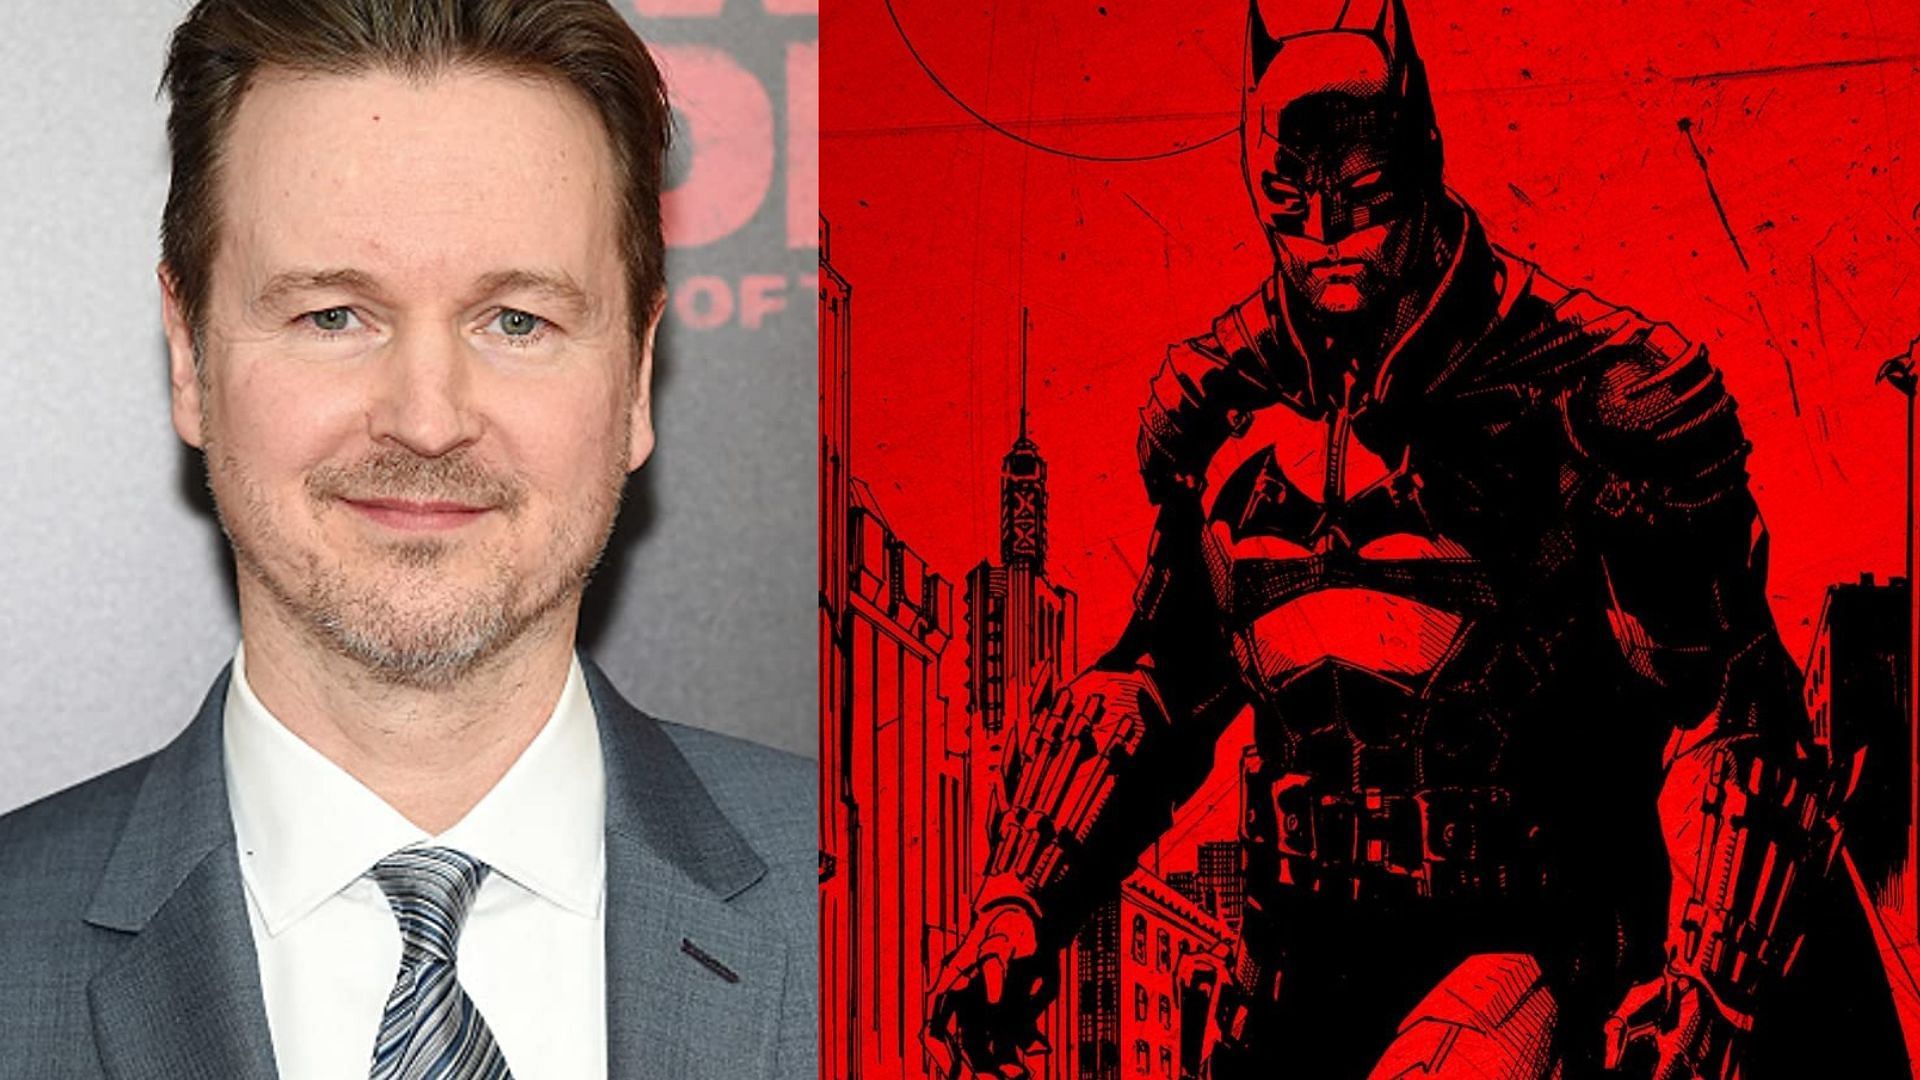 Matt Reeves is developing a sequel to The Batman (Images Via IMDb and DC)